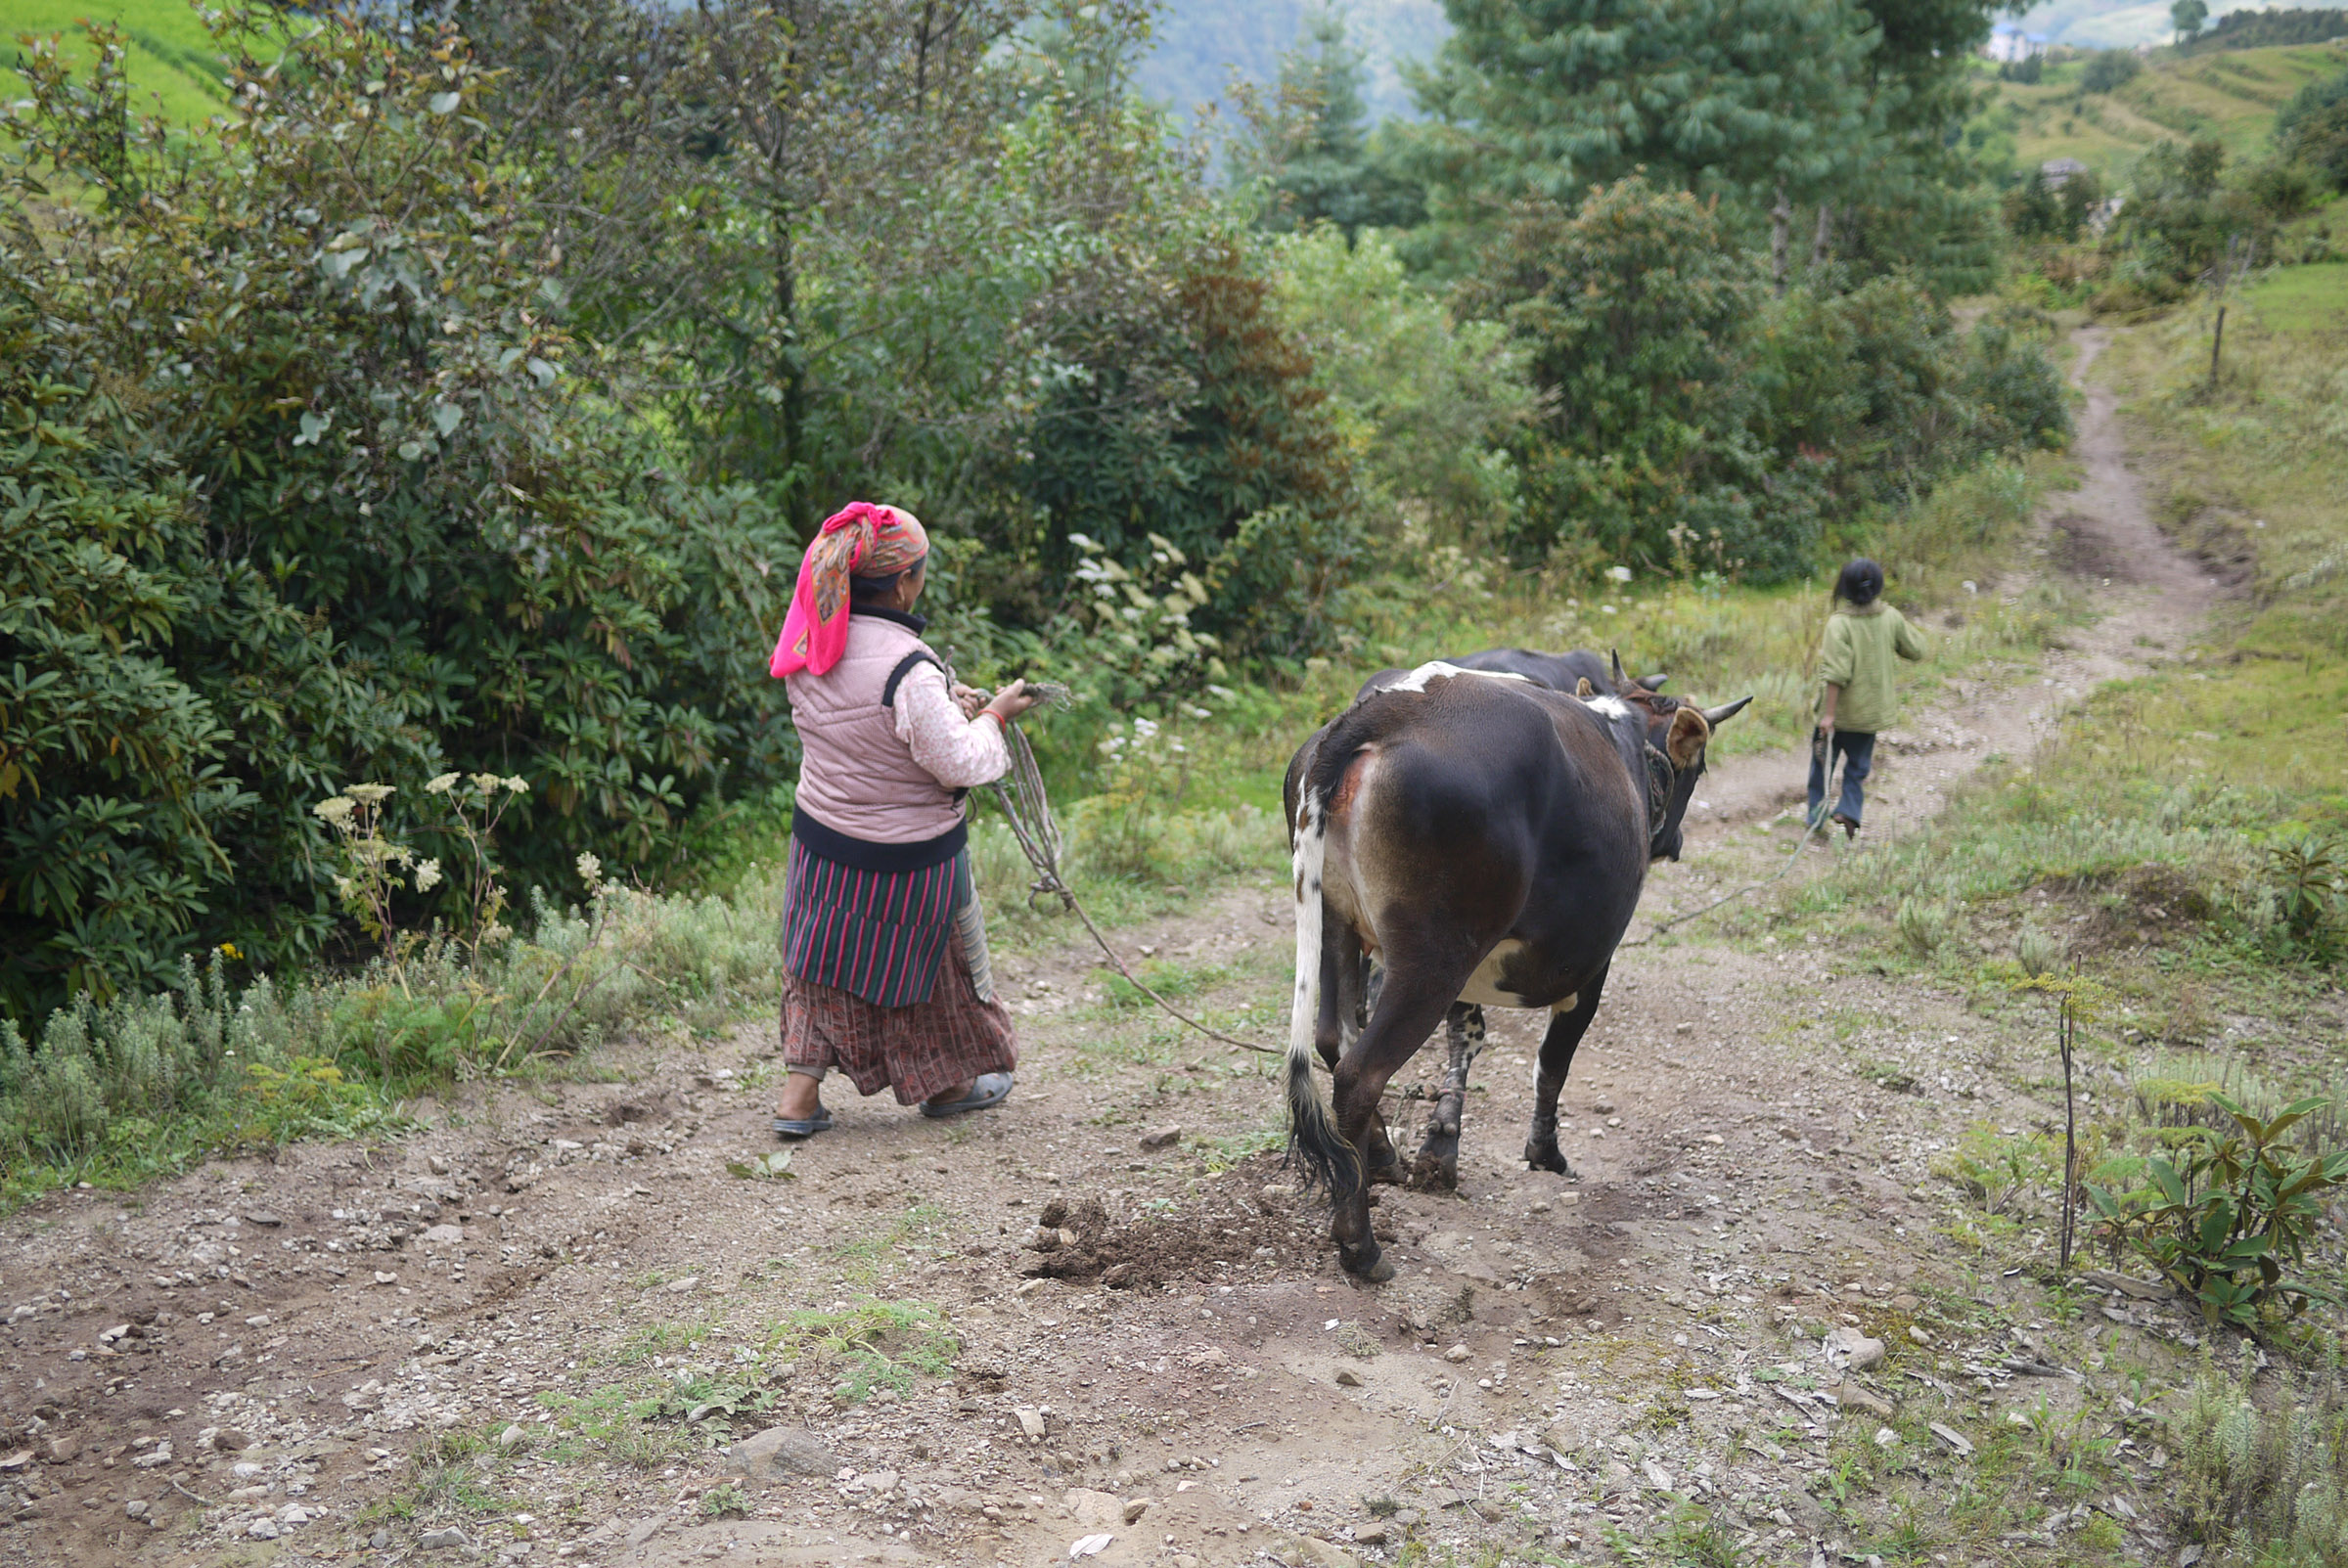 One Sherpa woman walks beside two cows holding their tethers; a young girl walks ahead of them.